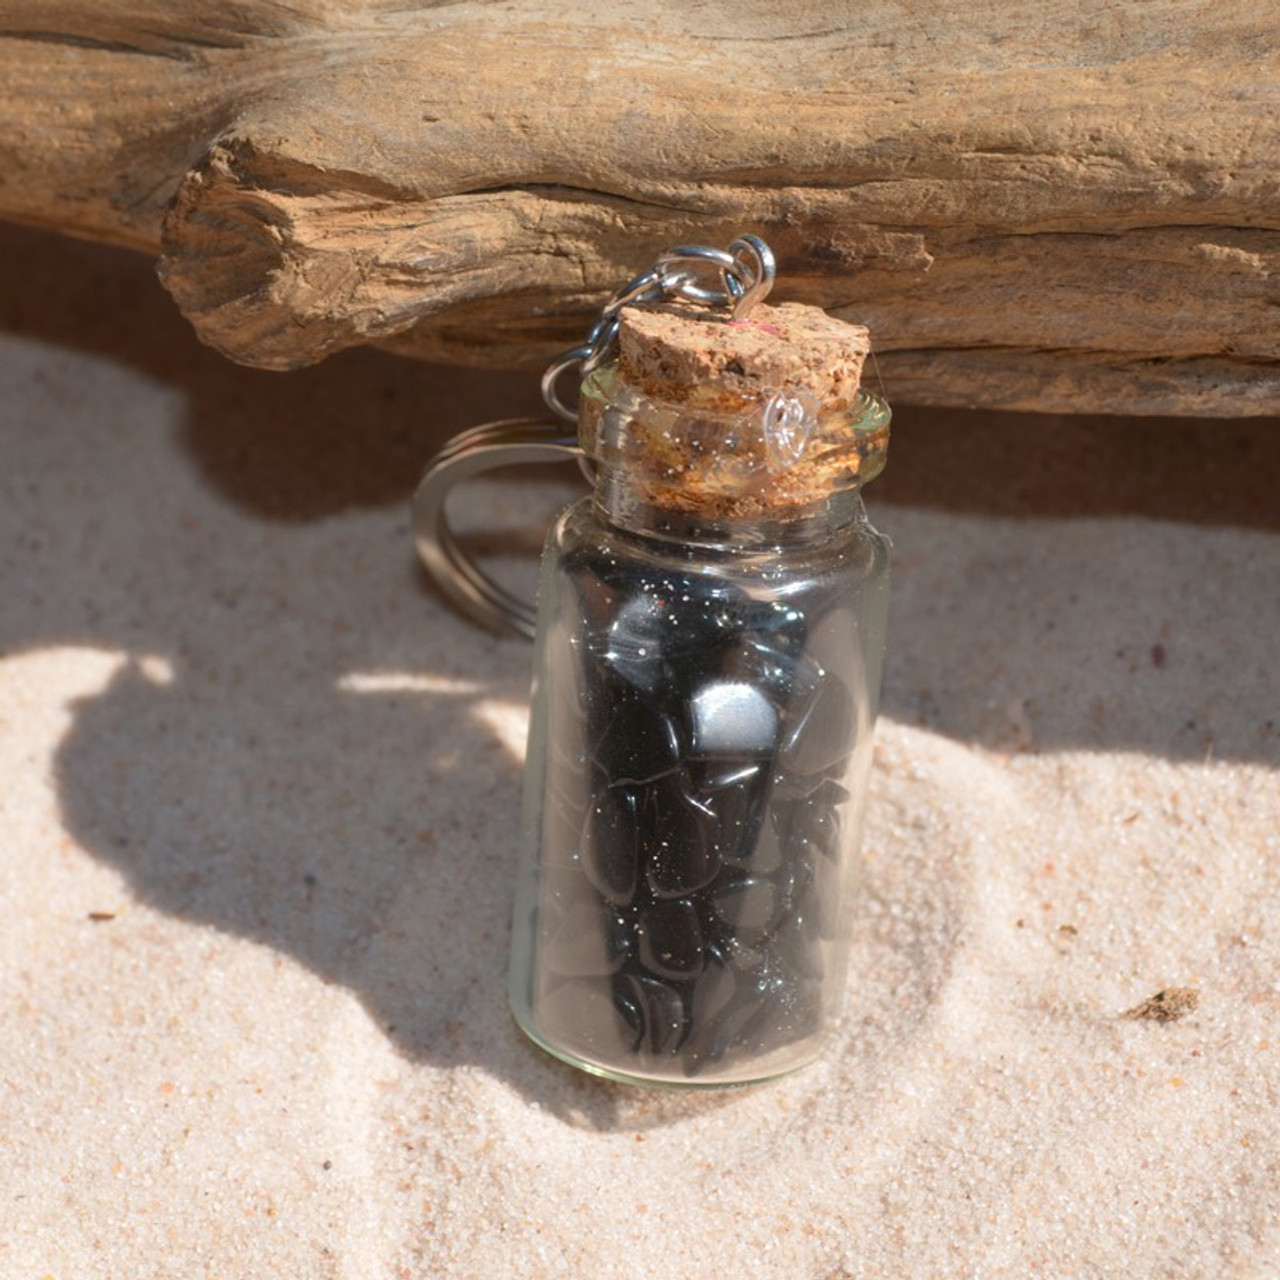 Apache Tears Stones in a Glass Vial Keychain - Made to Order